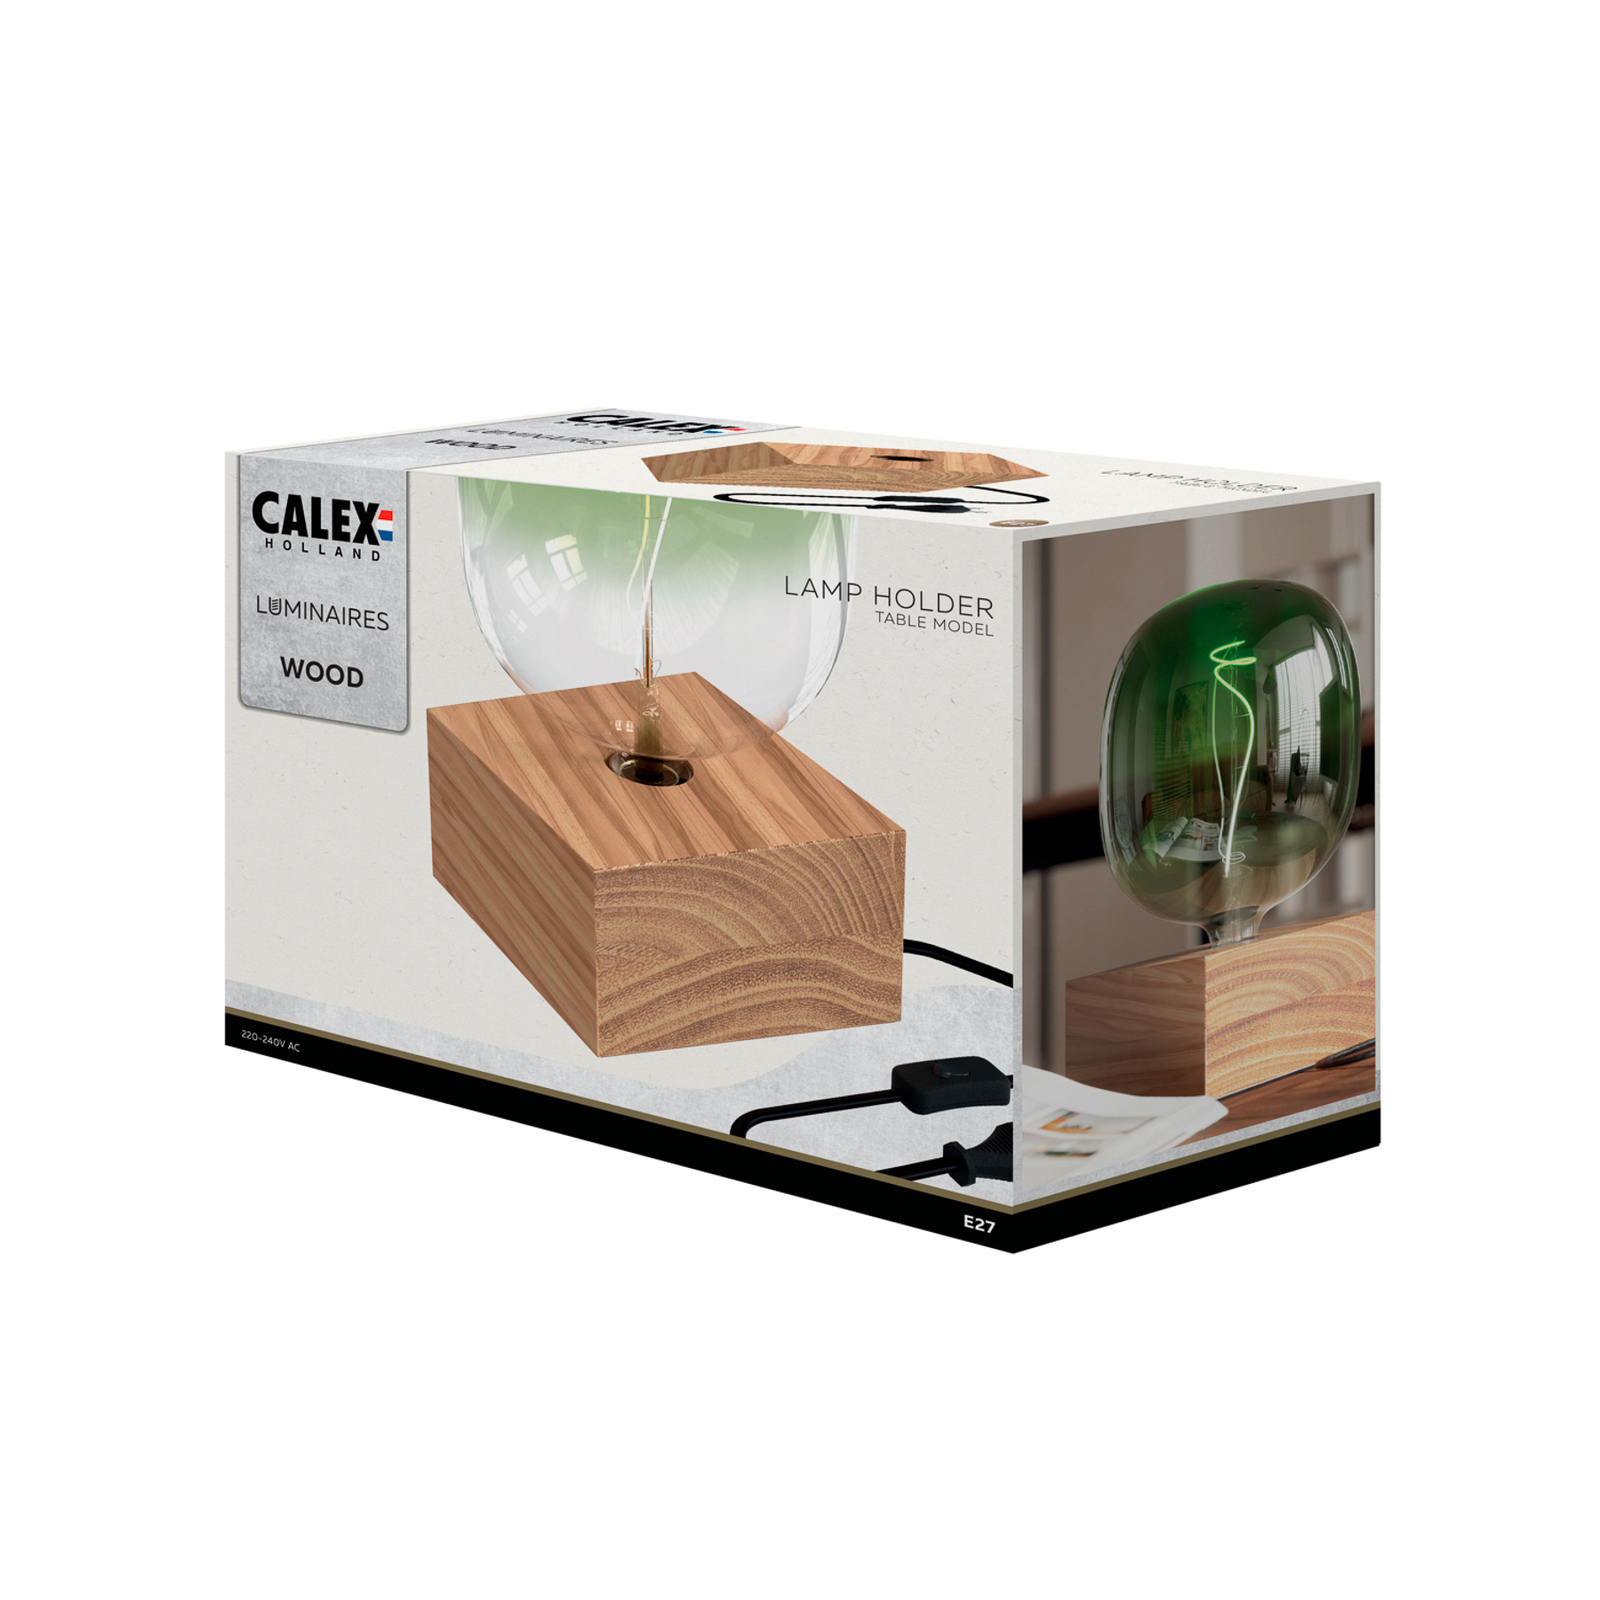 Calex Square Wood table lamp made of wood